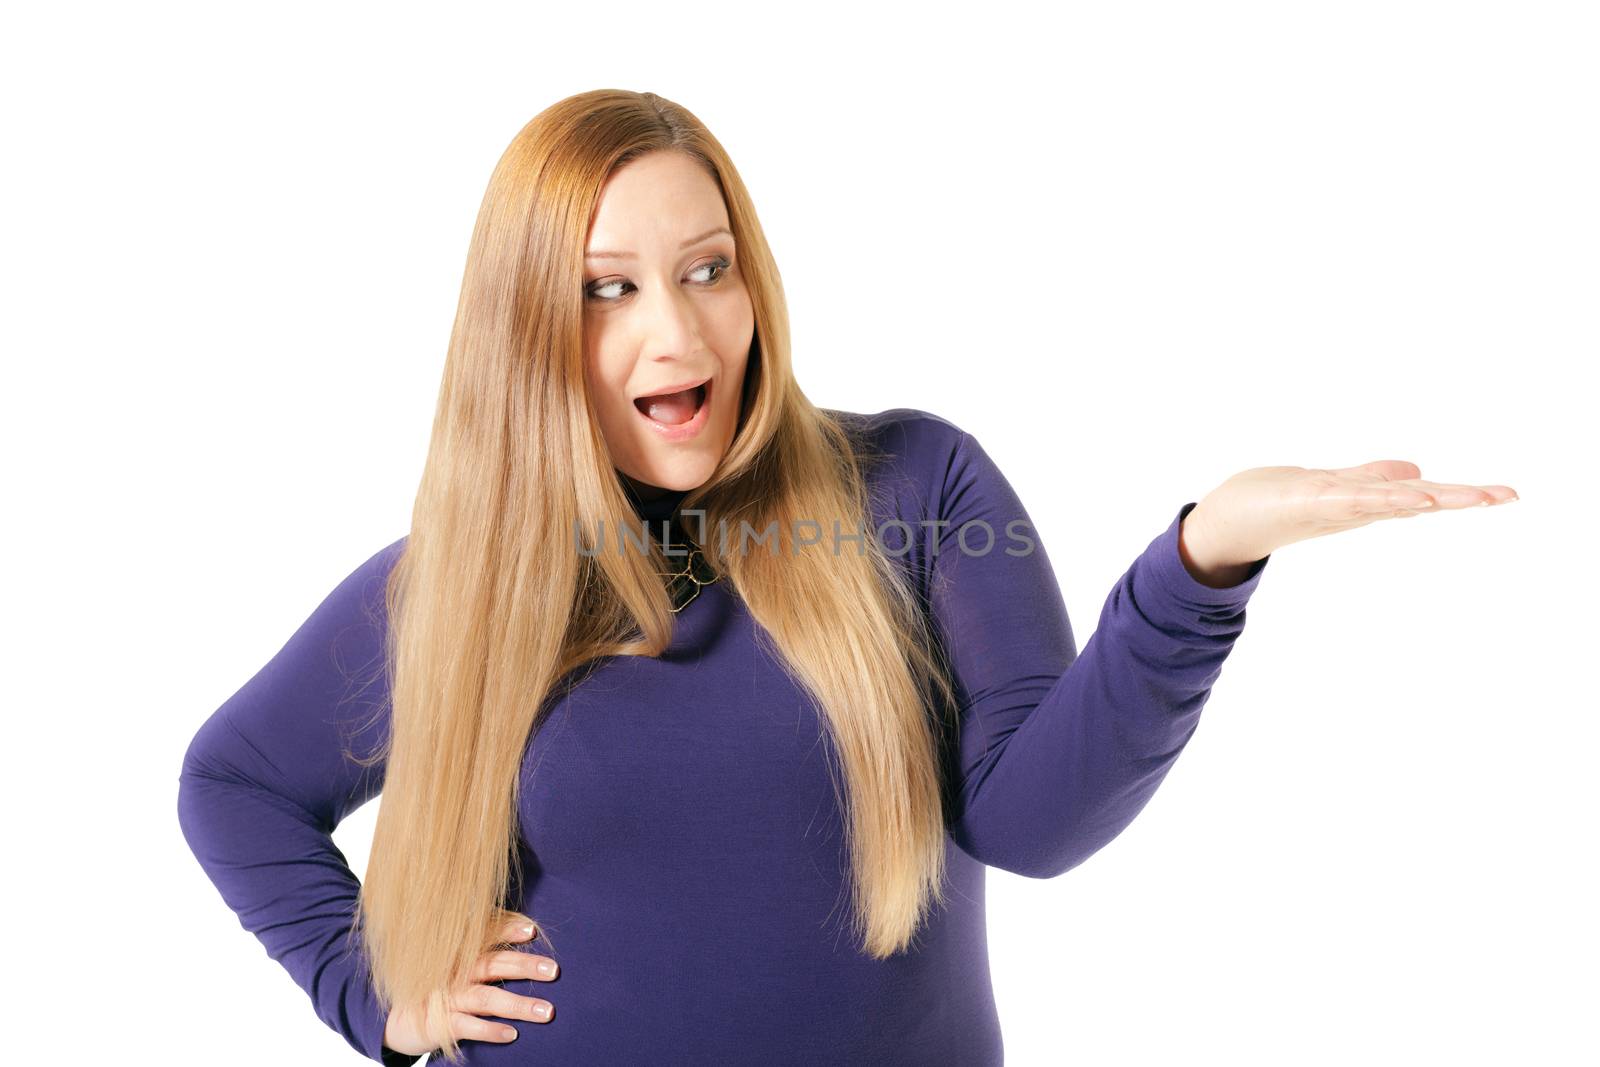 Overweight woman isolated on white with work path, reacting to and holding nothing